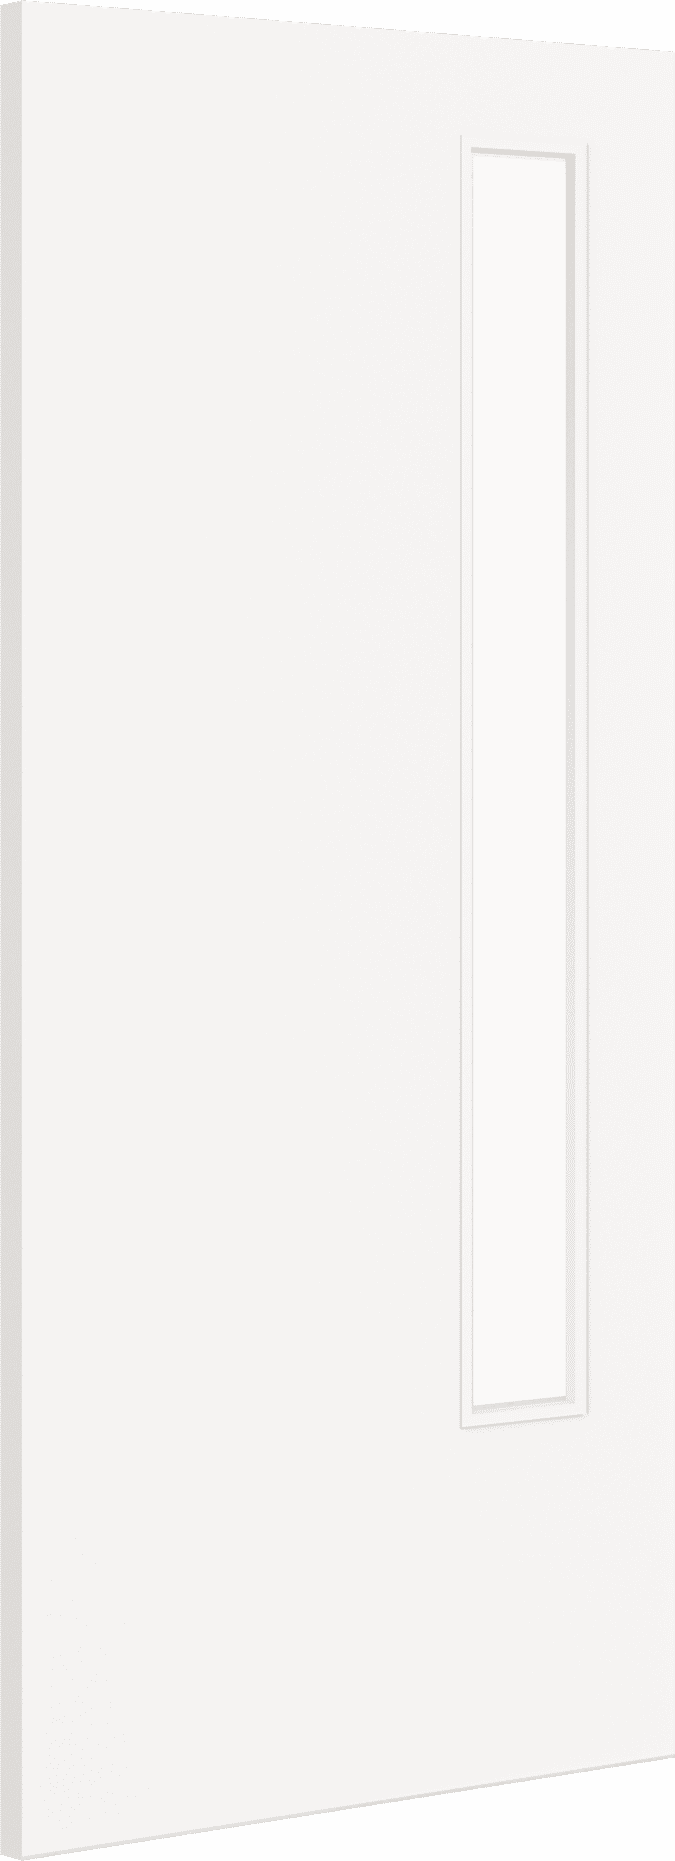 1981mm x 533mm x 44mm (21") Architectural Paint Grade White 13 Frosted Glazed Fire Door Blank